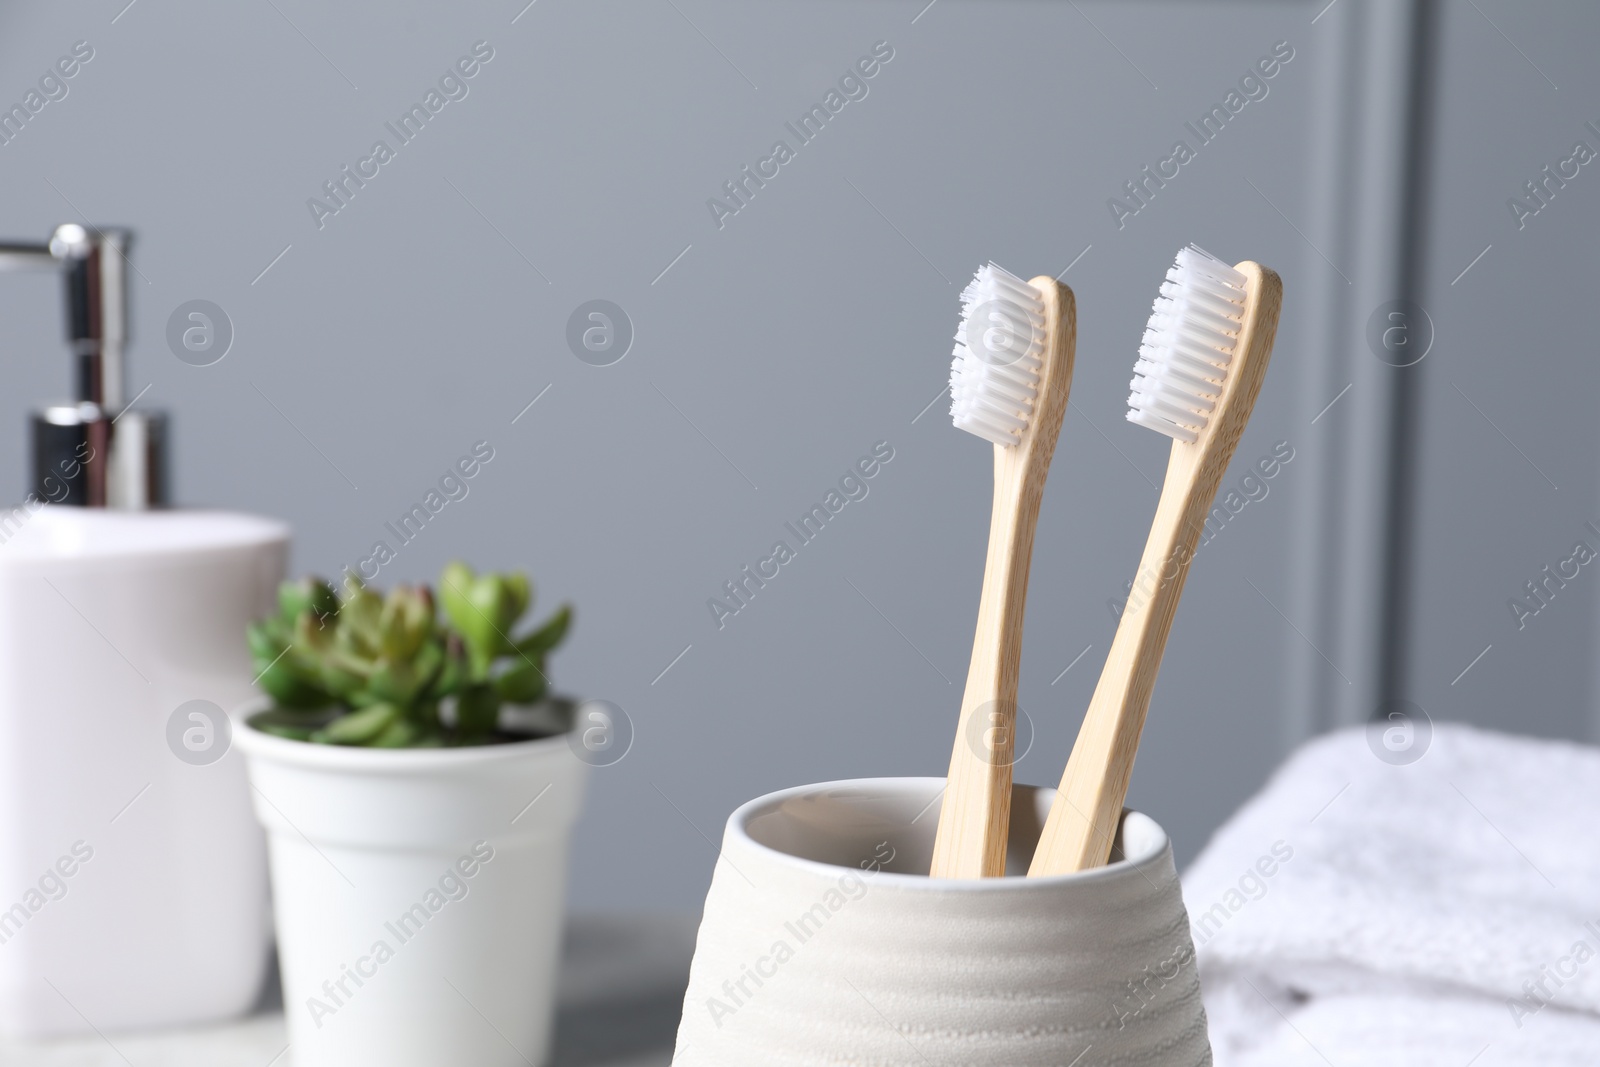 Photo of Bamboo toothbrushes in holder on blurred background, closeup